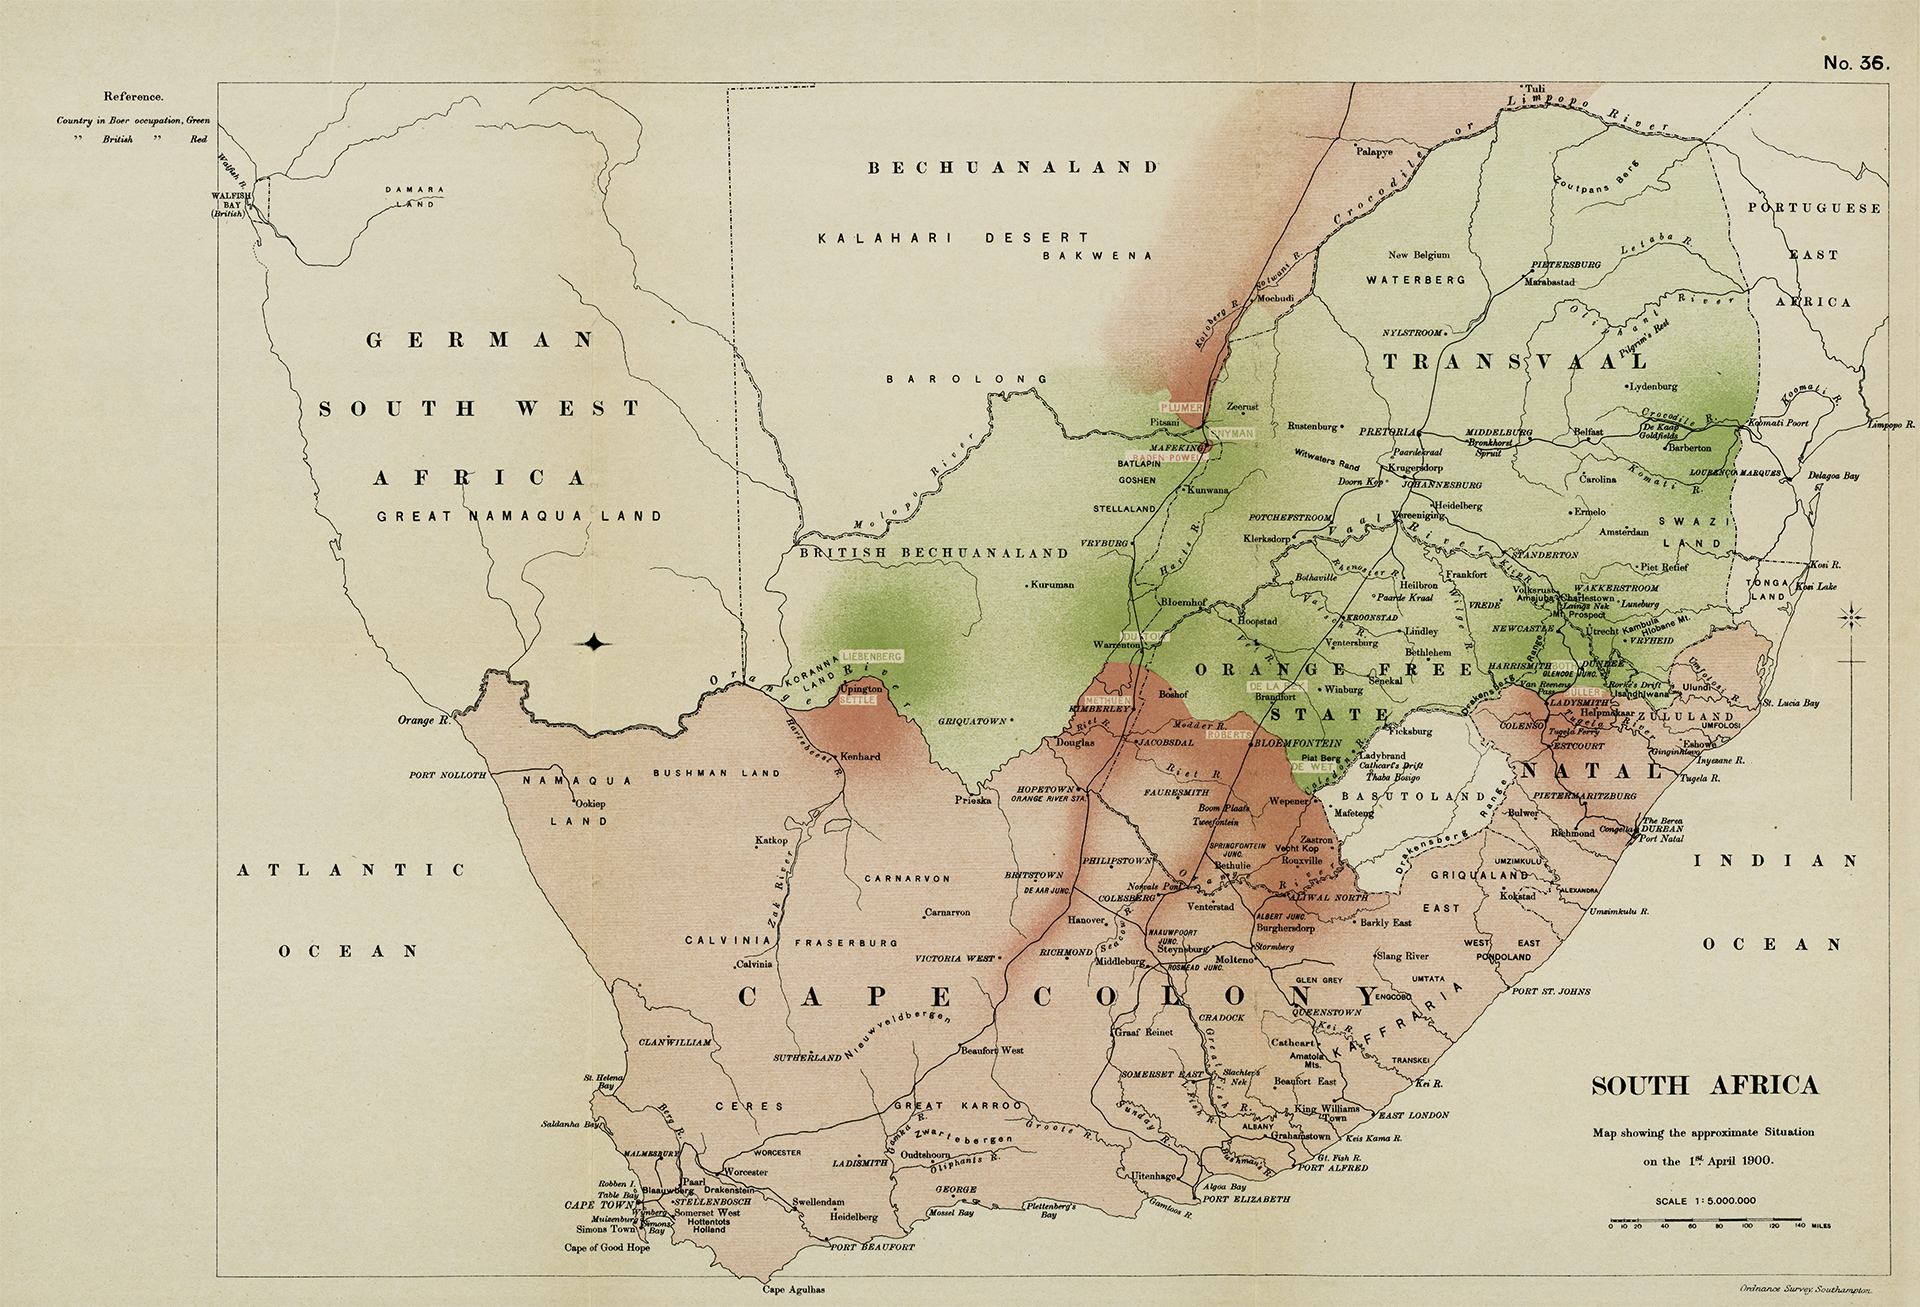 <p>By 1906, the University of the Cape of Good Hope is administering examinations for candidates in Southern Rhodesia (now Zimbabwe), Bechuanaland (now Botswana), Basutoland (now Lesotho) and Swaziland.</p>